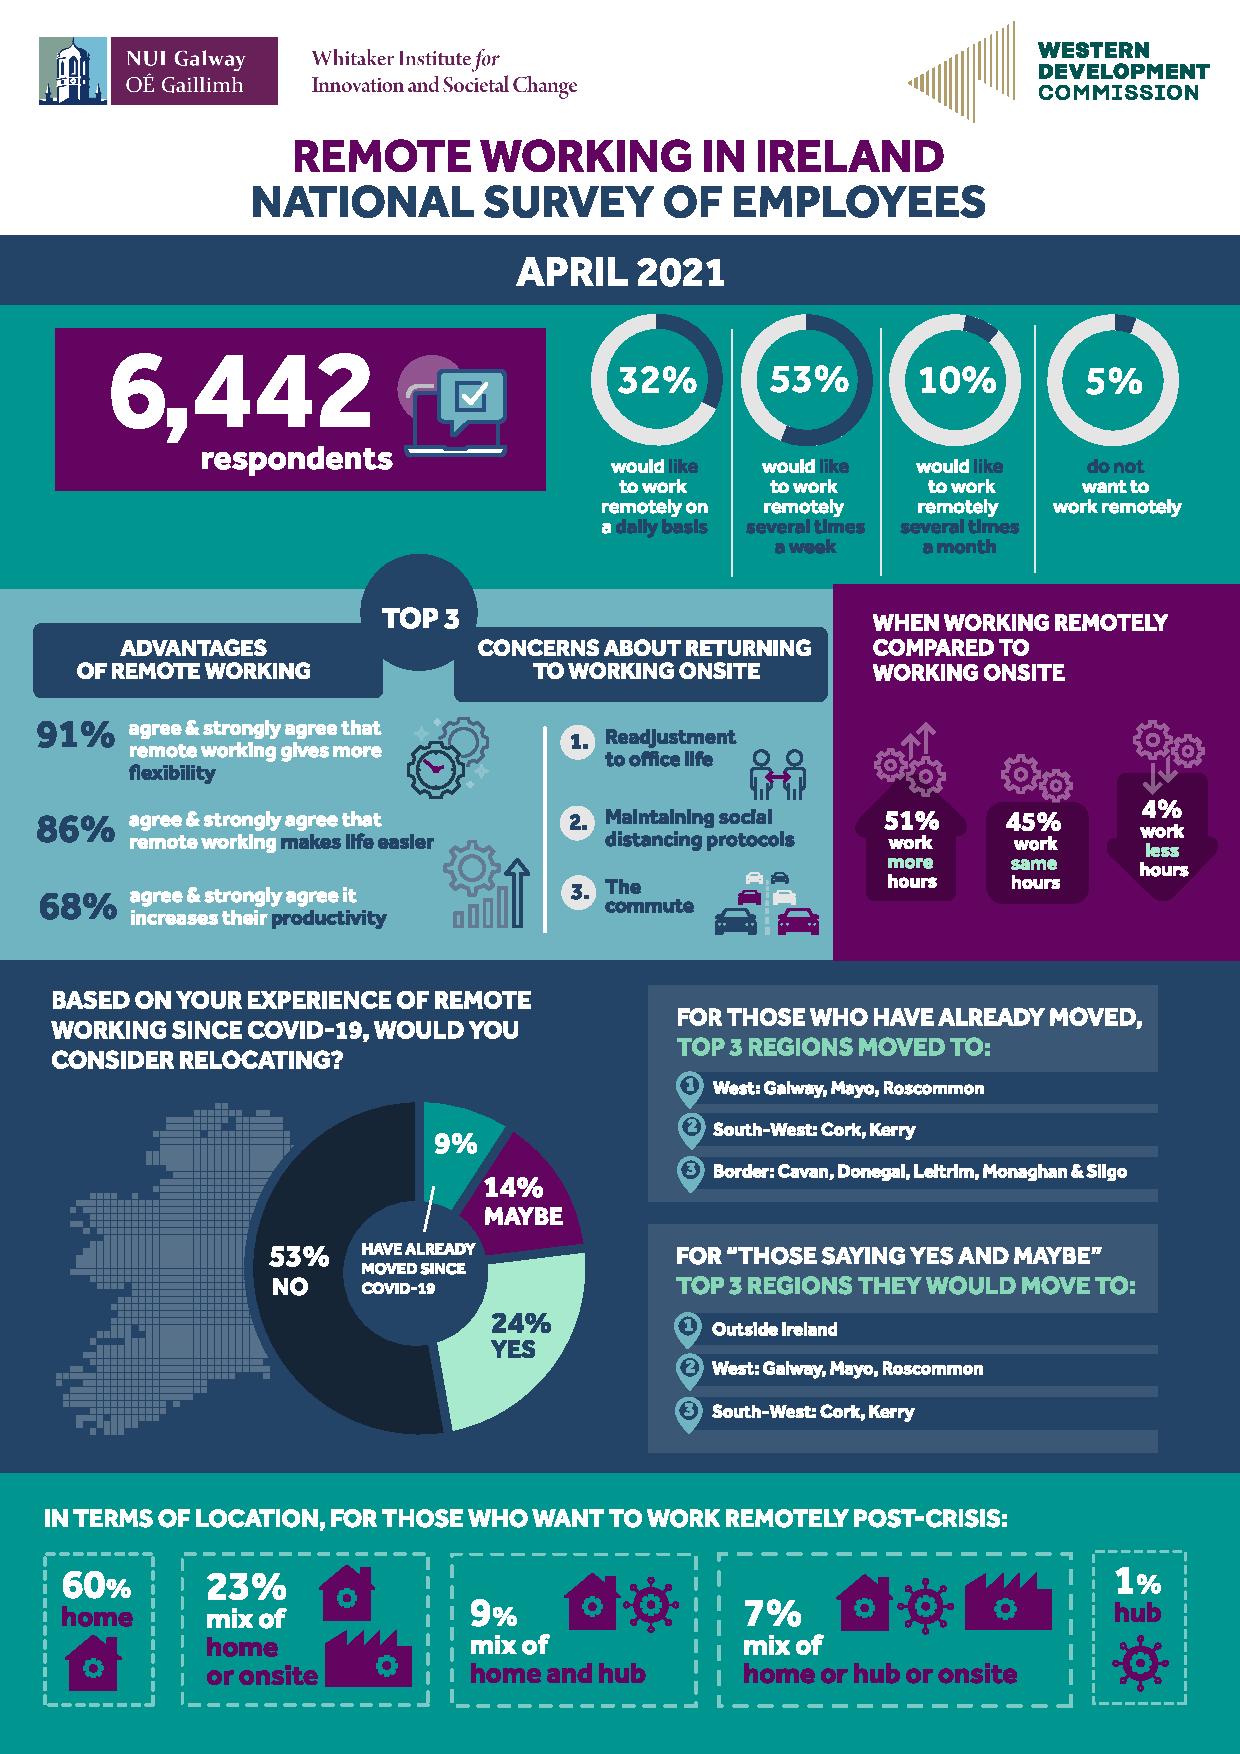 An infographic showing statistics about employee perspectives on remote working.